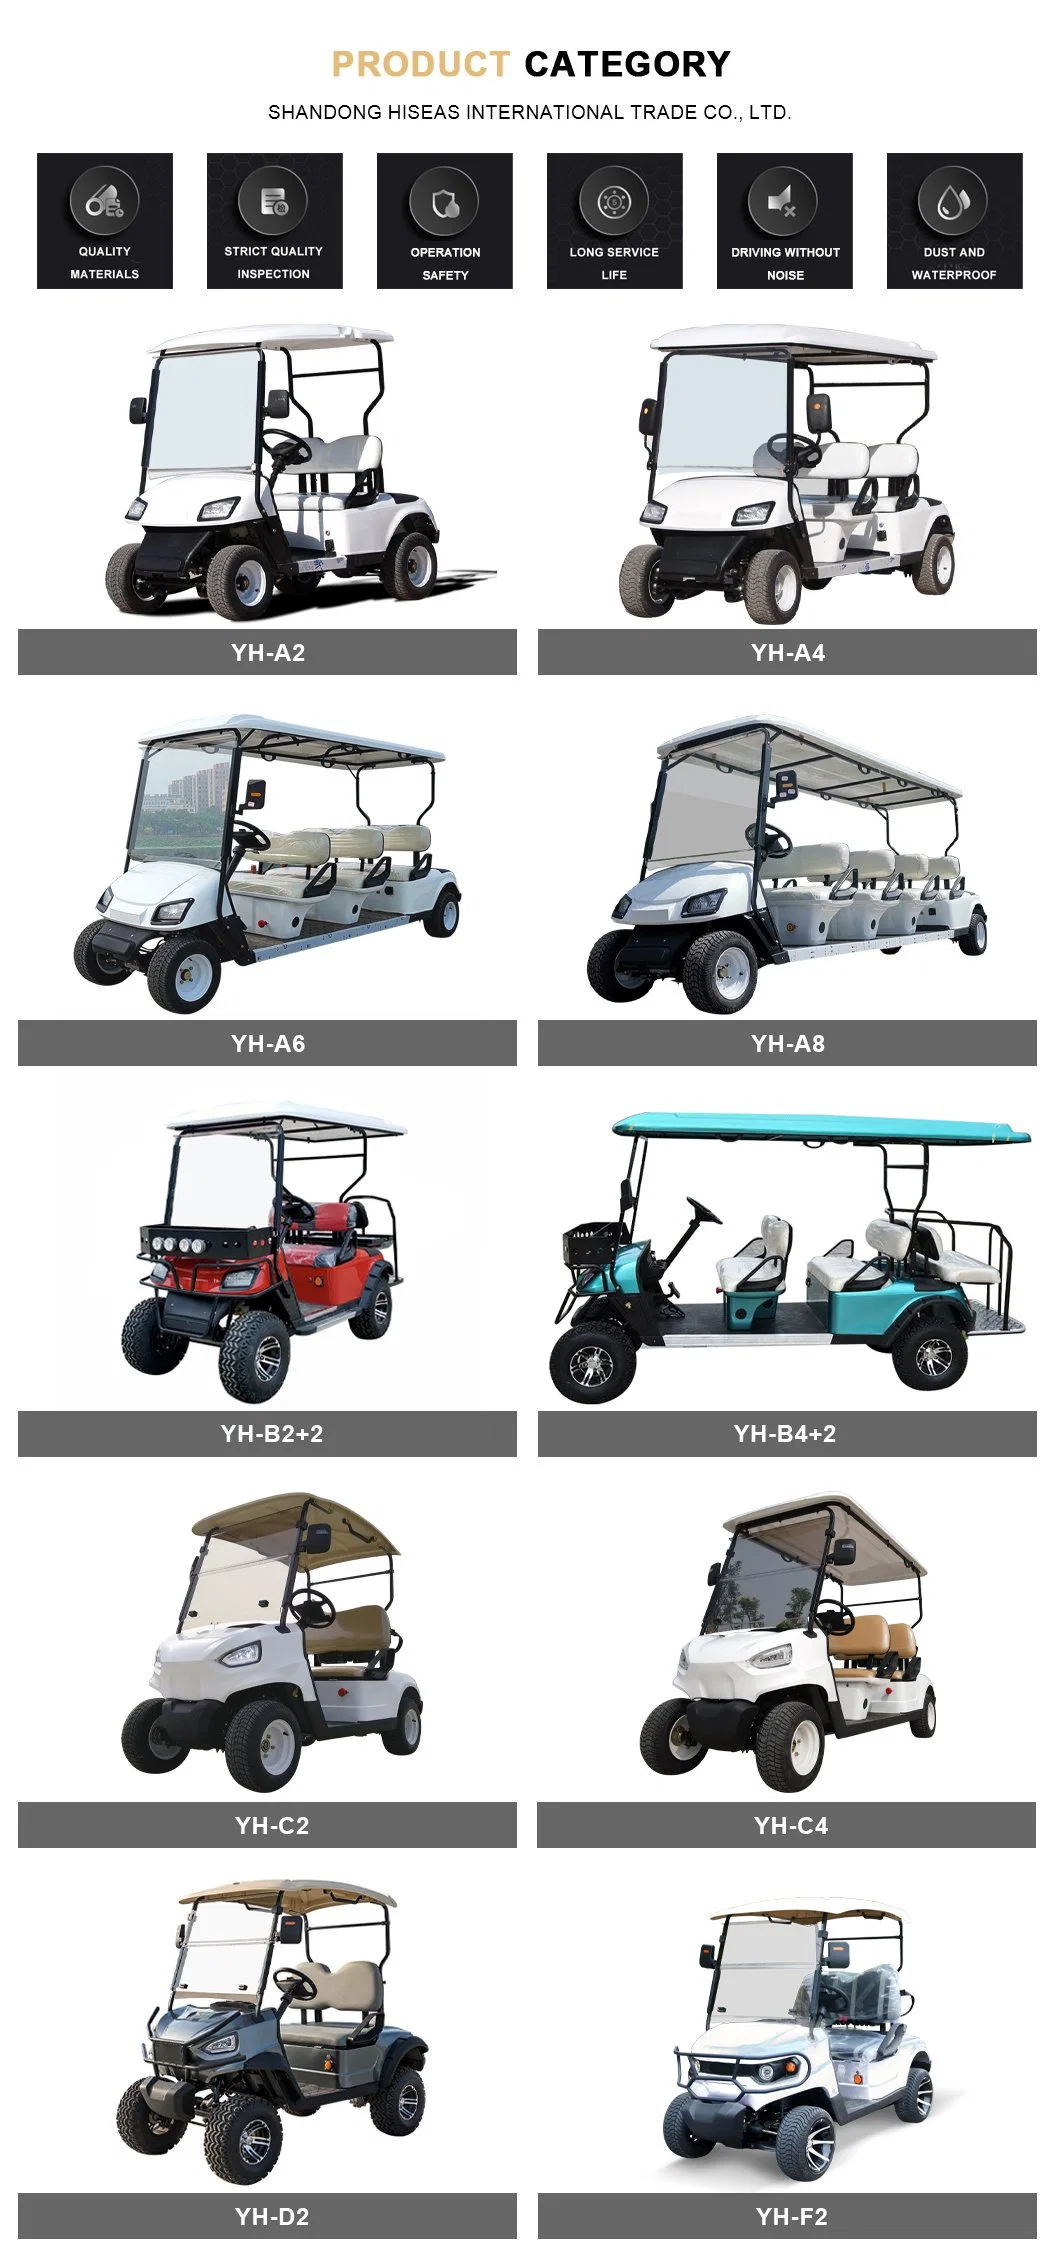 China Cheap 4 Seater Golf Carts AC Asynchronous Motor Lithium Batteries Golf Cart Street Legal Golf Cart Buggy Hunting Cart Electric Scooter Electric Car